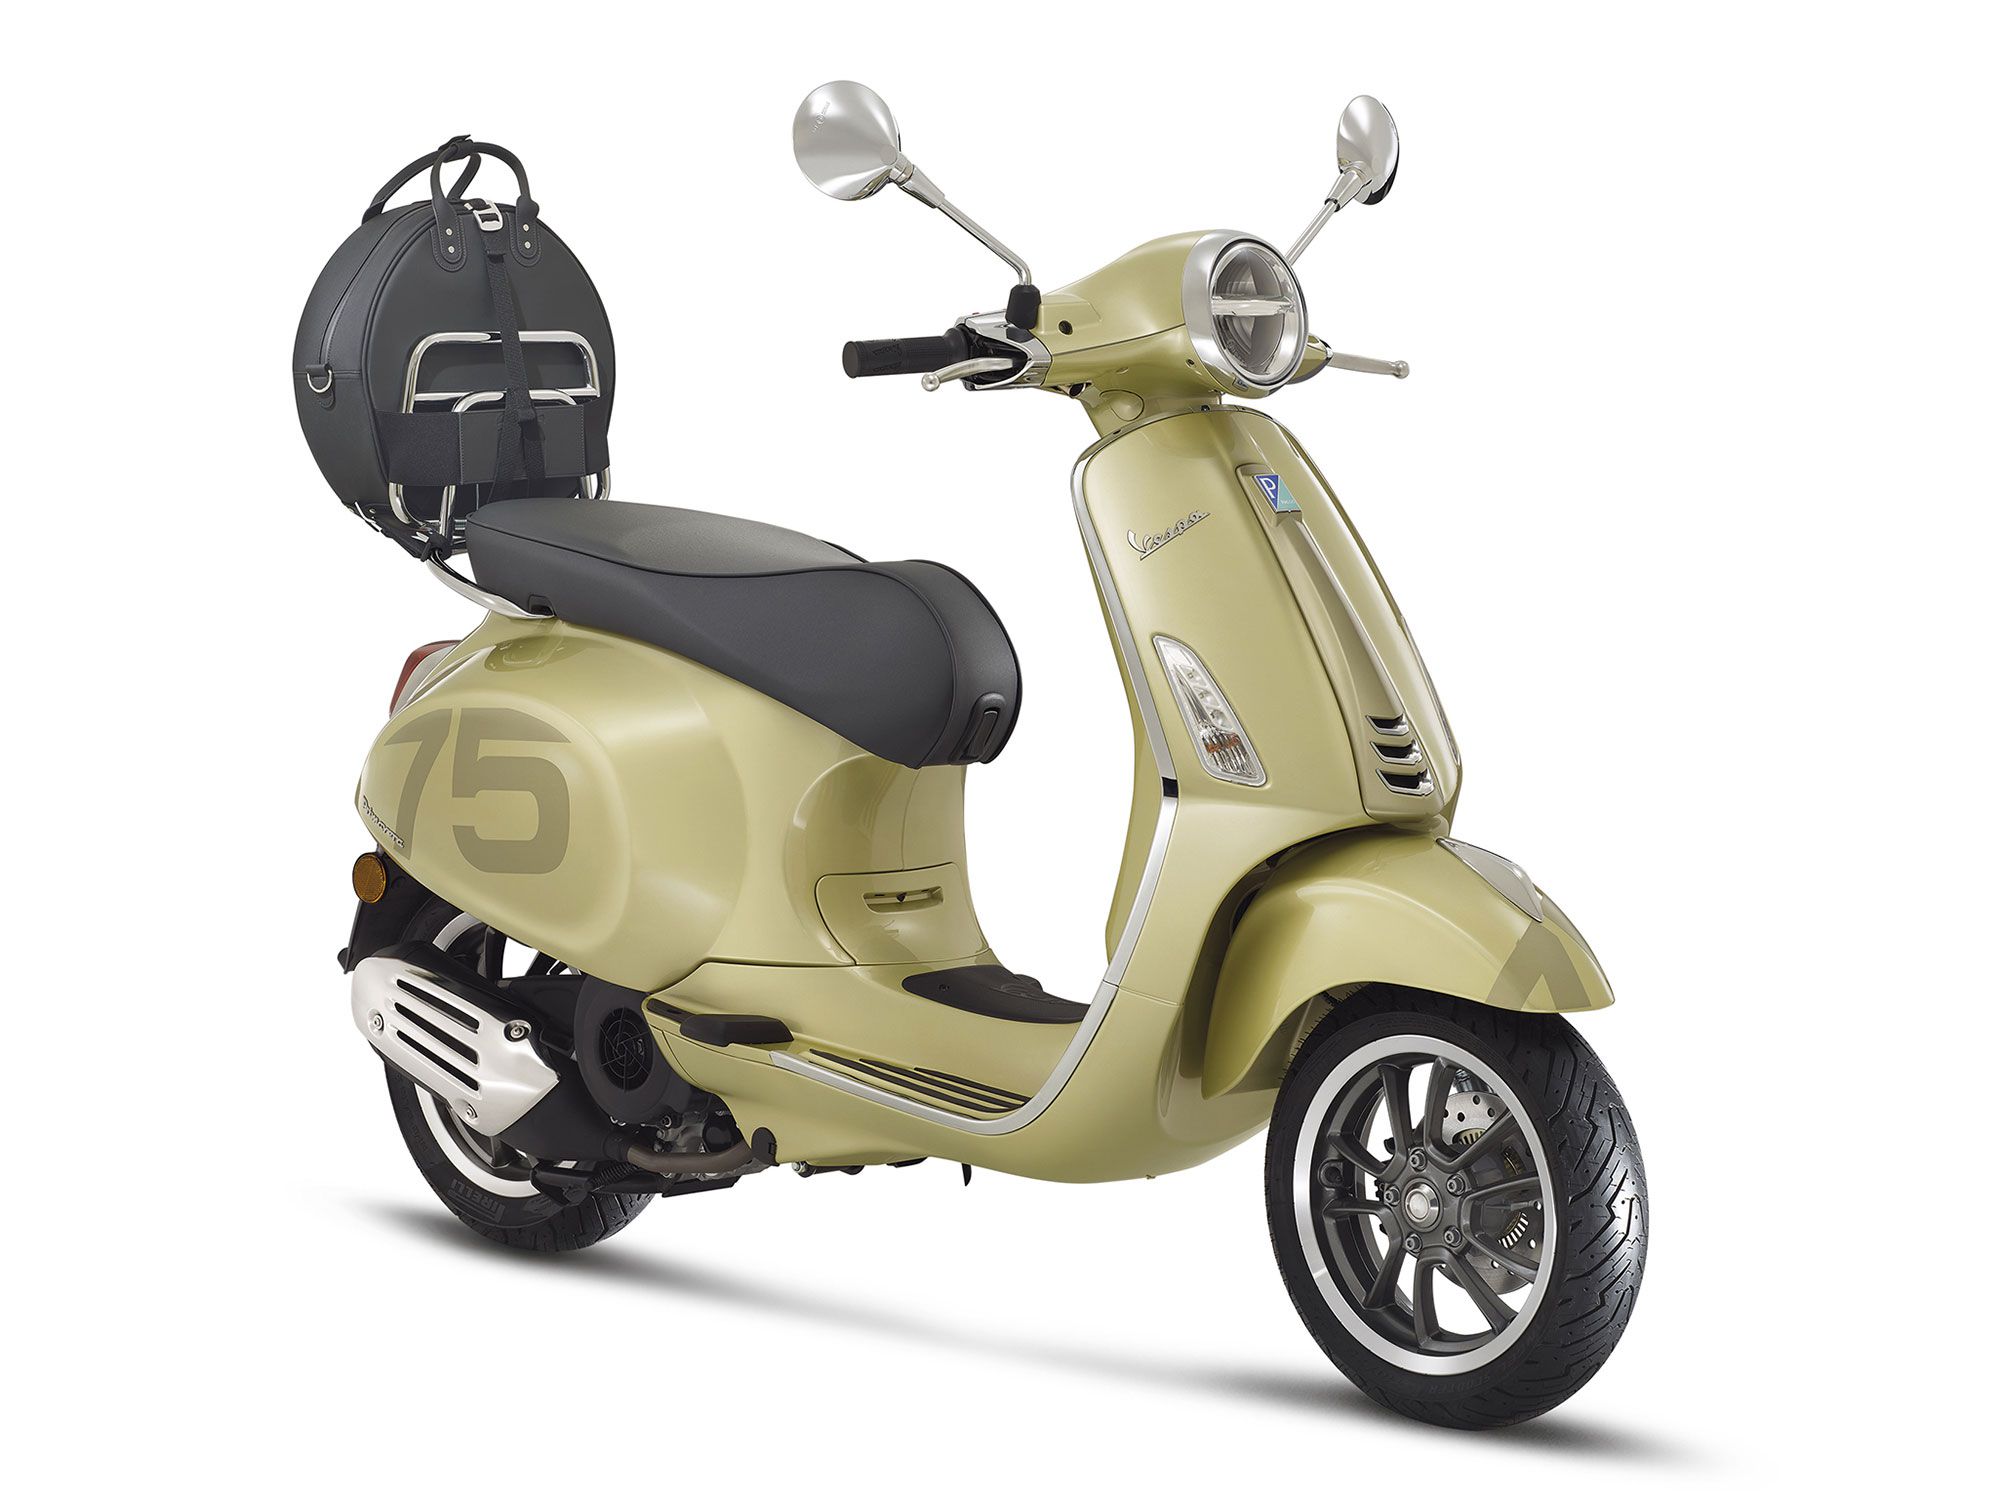 Vespa developed a special colorway to honor the aesthetic popular in the 1940s.